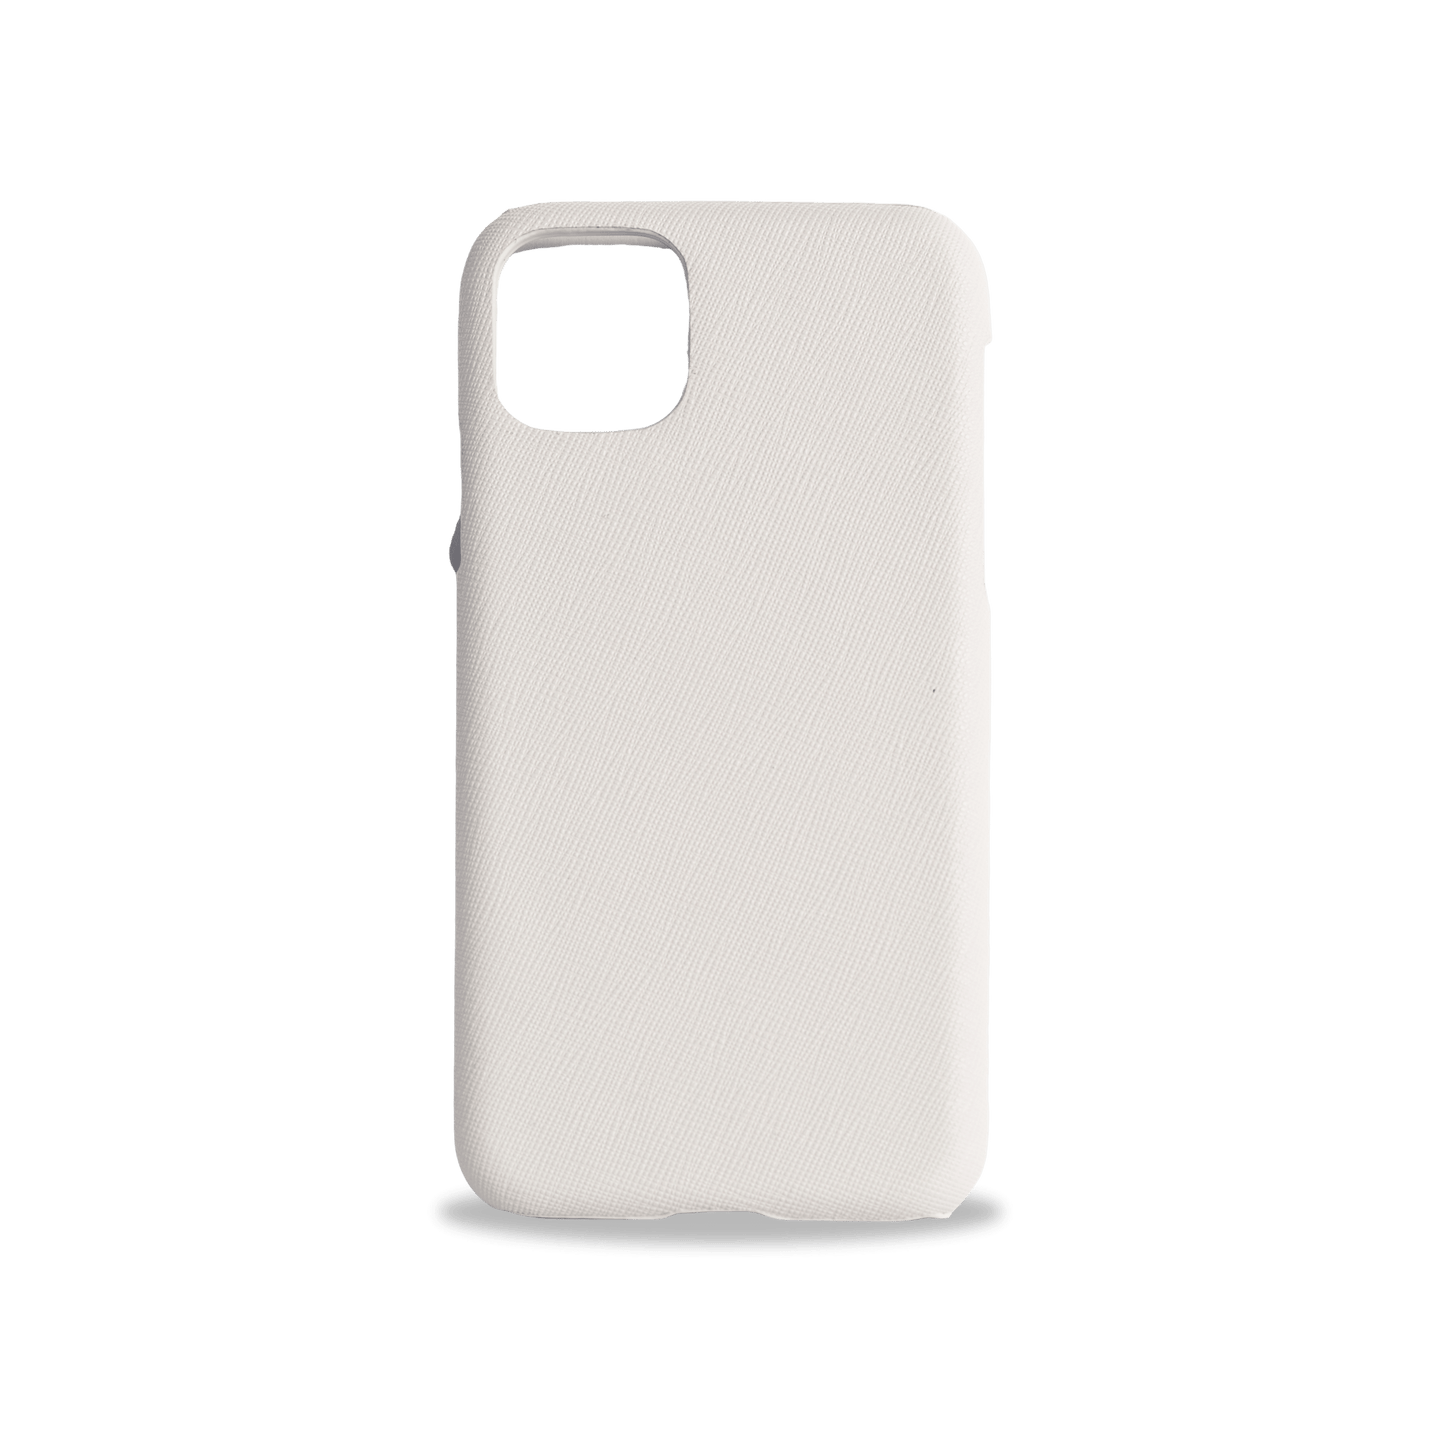 iPhone 11 Pro Case Grey - Personal Press